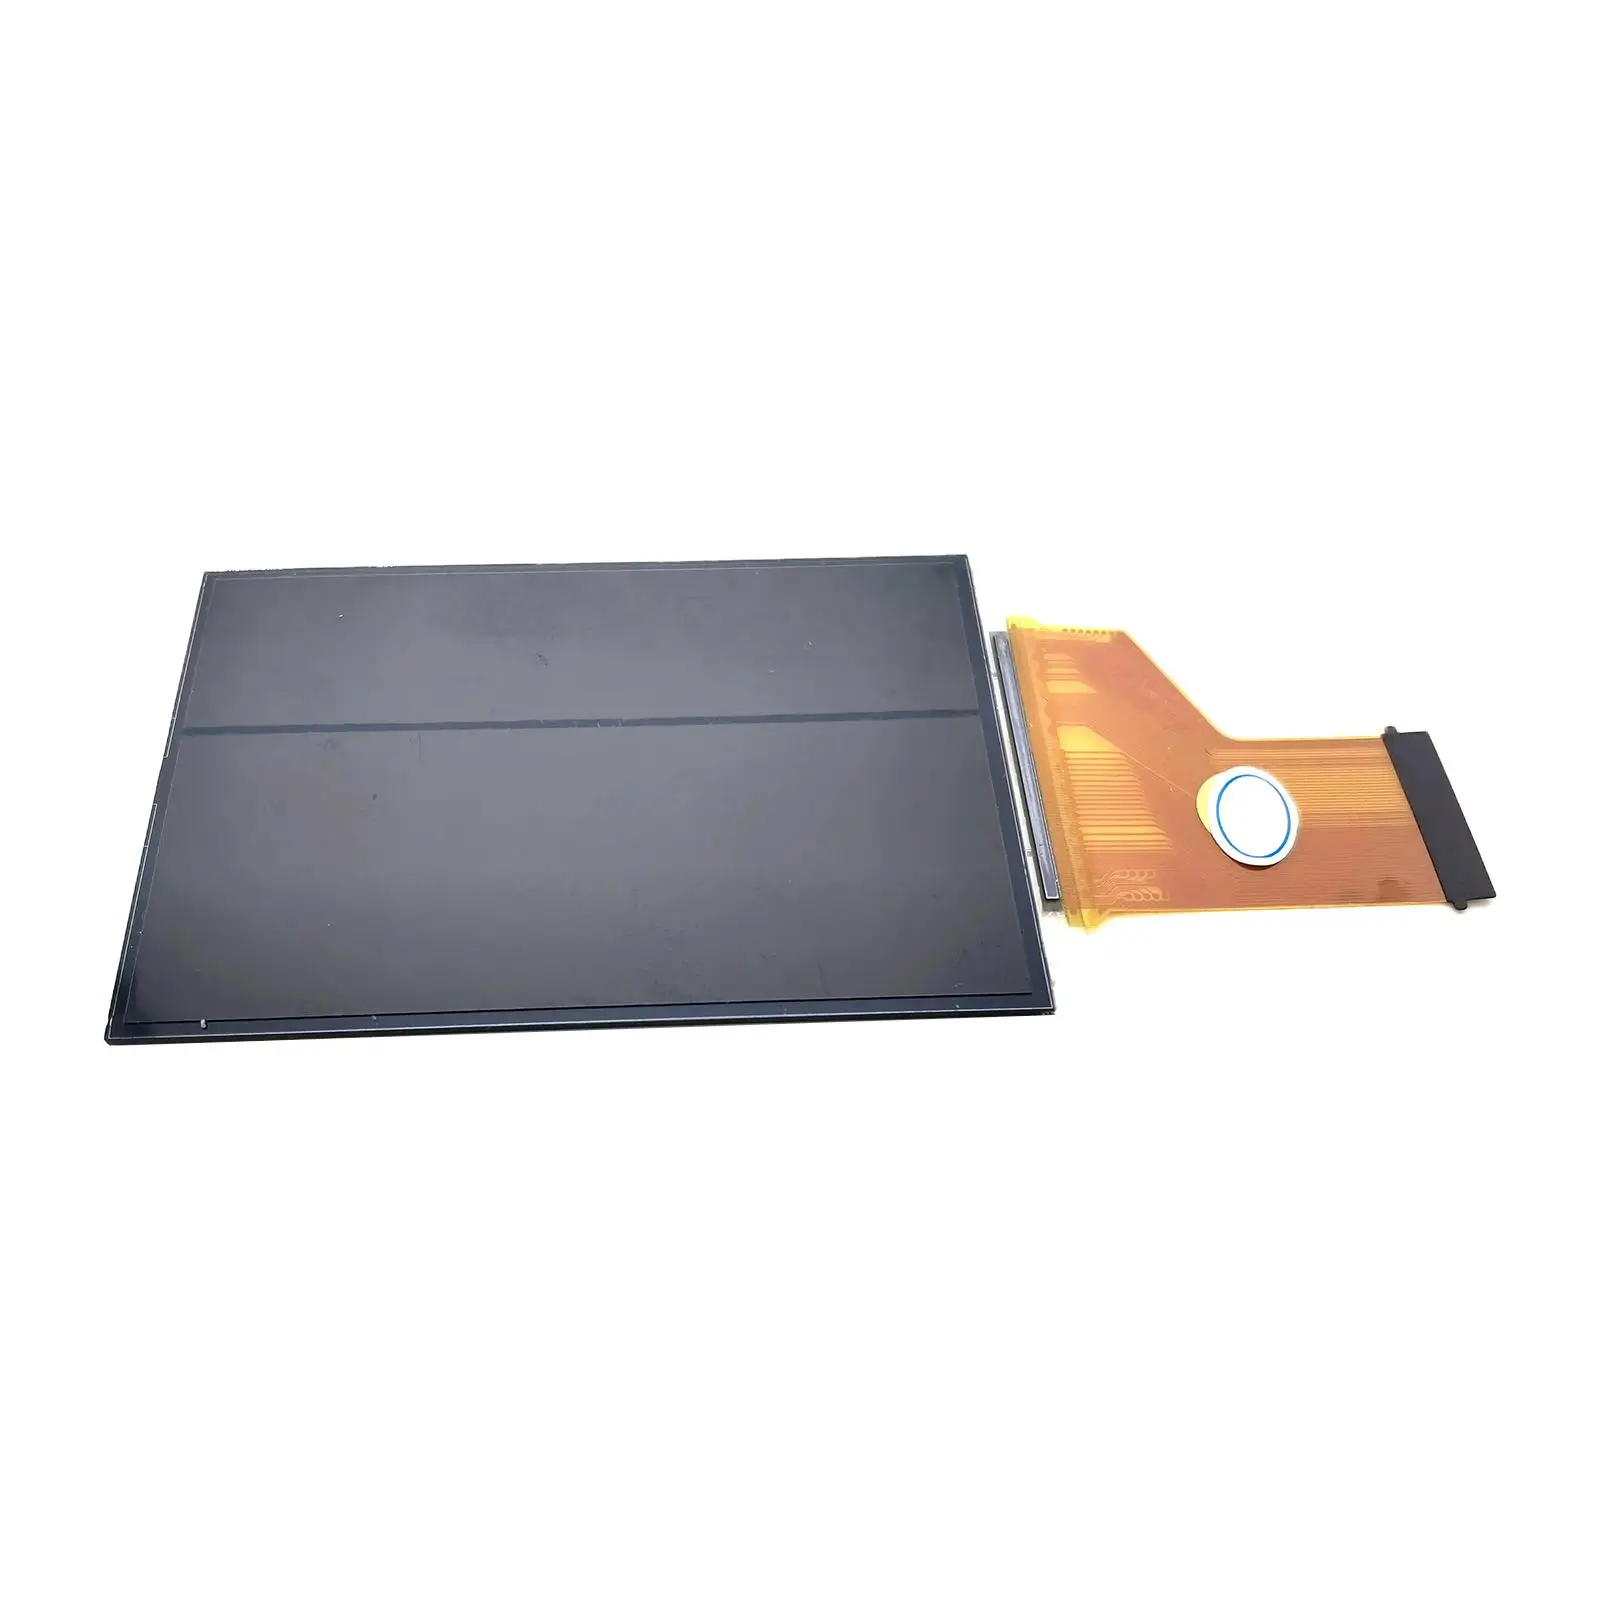 LCD Display Screen Spare Parts for X-M1 XM1 X-A1 XA1 x30 Digital Camera Repair Parts Made of high quality material